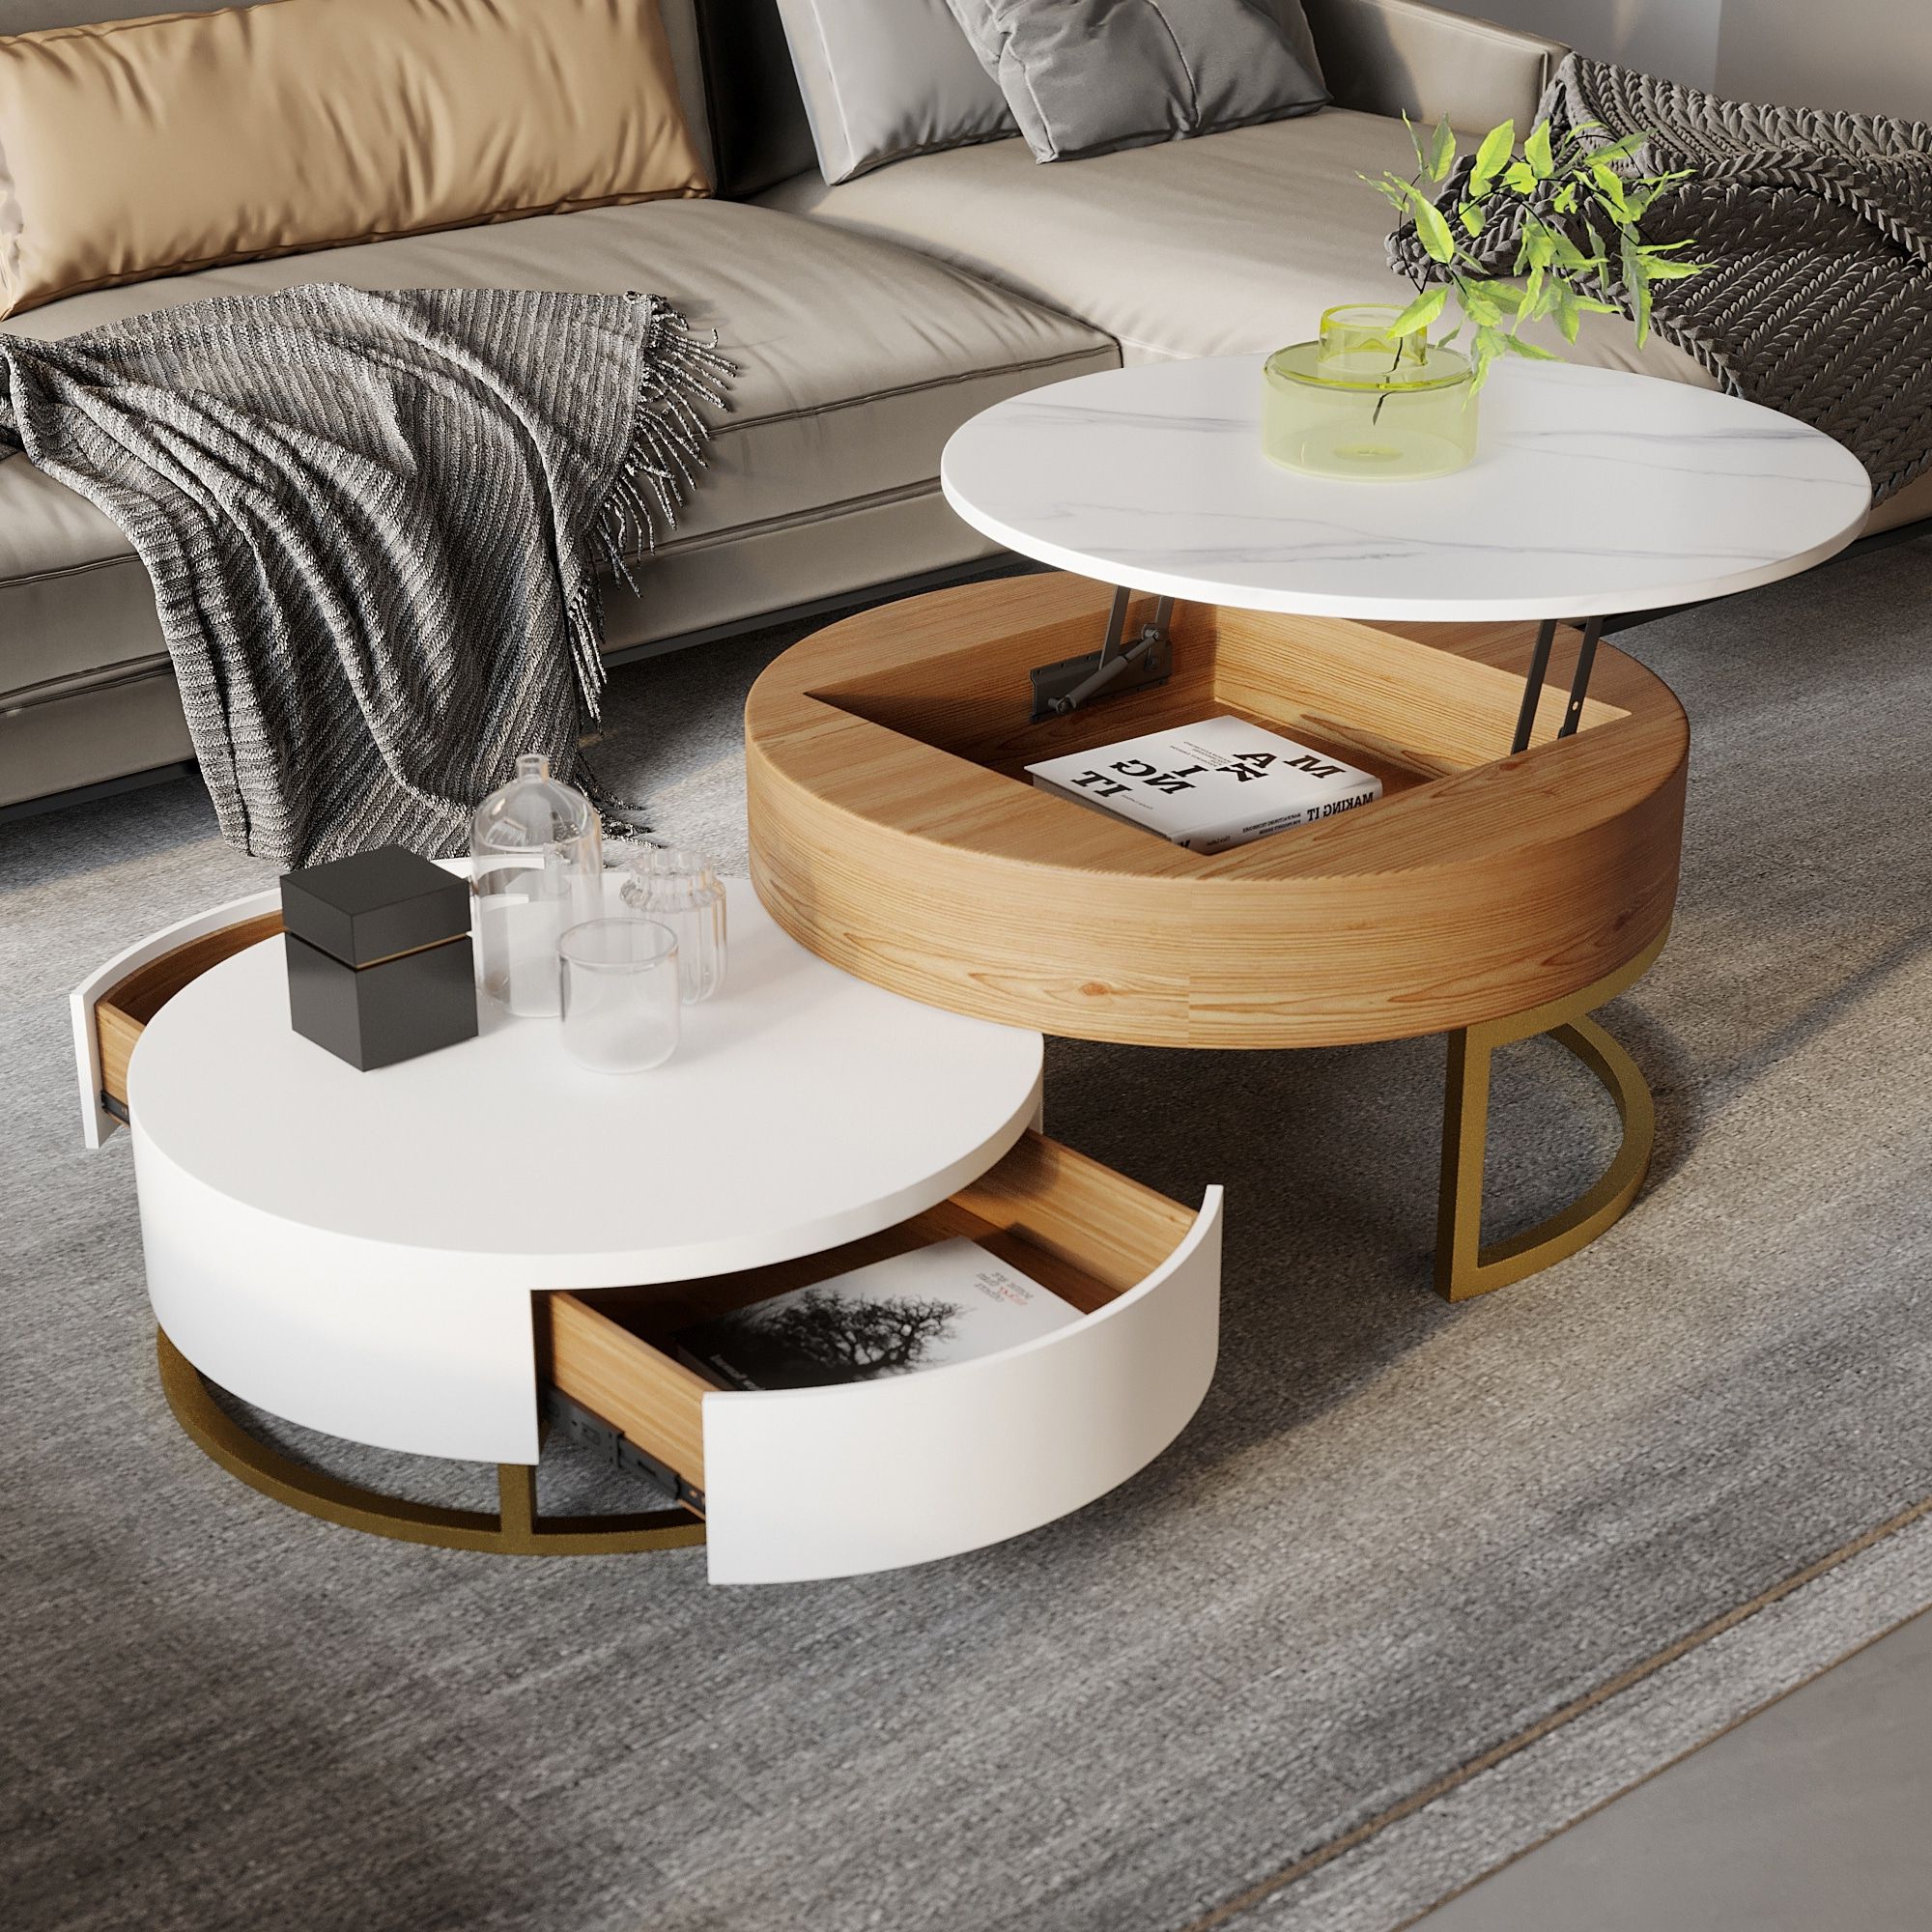 Most Current Lift Top Coffee Tables With Storage Drawers Regarding Lift Top Round Coffee Table Set Of 2 With Storage, 2 Pinewood Drawers,  Swivel Tabletop, Nesting Design – On Sale – Bed Bath & Beyond –  (View 7 of 10)